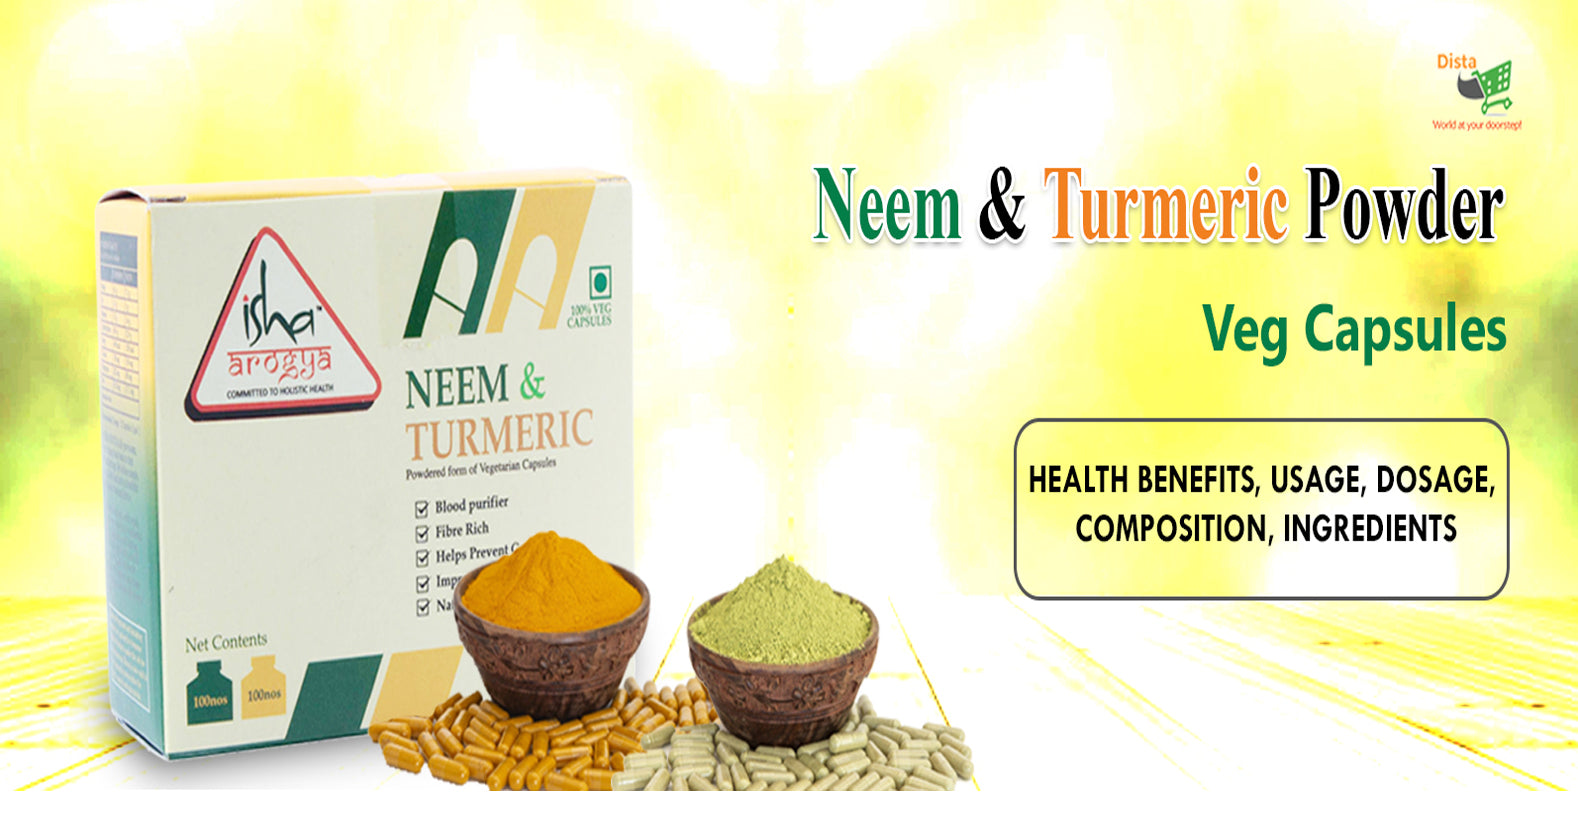 Isha Life Neem and Turmeric Capsules - Ingredients, Composition, Health Benefits, Usage, Dosage